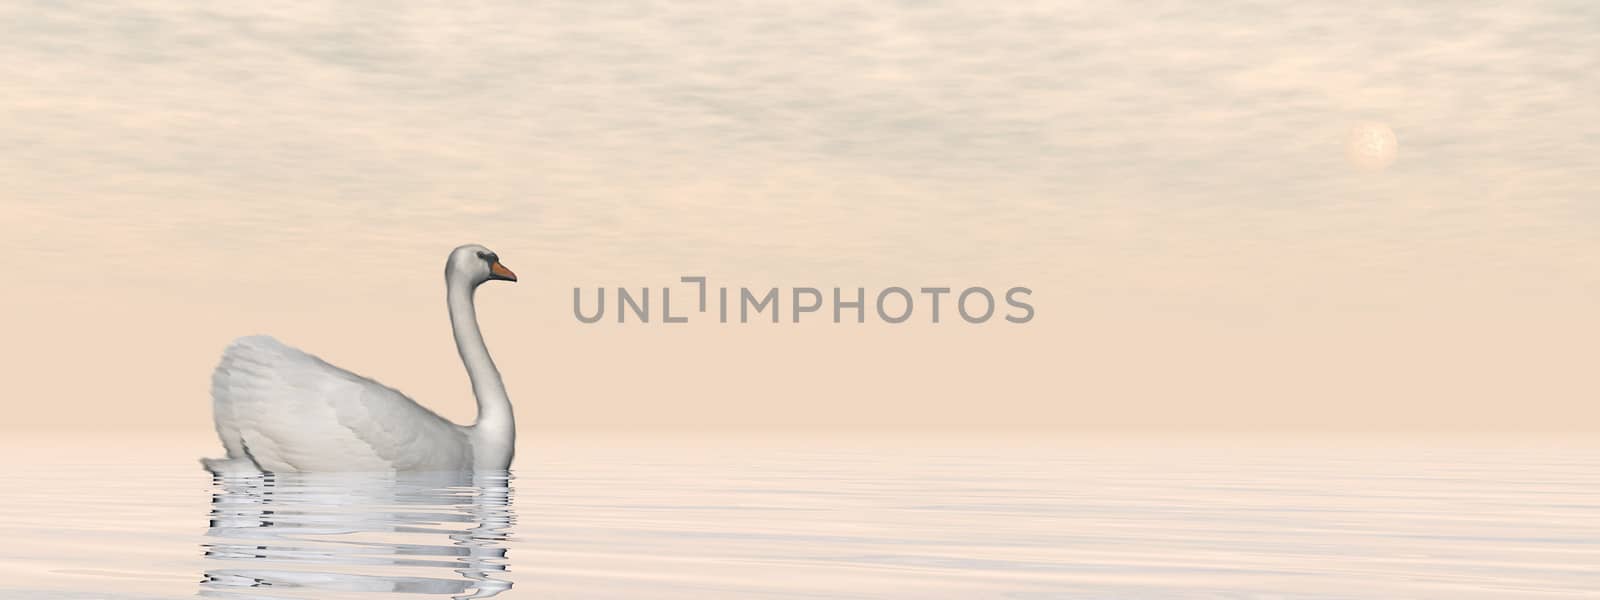 Peaceful white swan floating on the water by sunset - 3D render